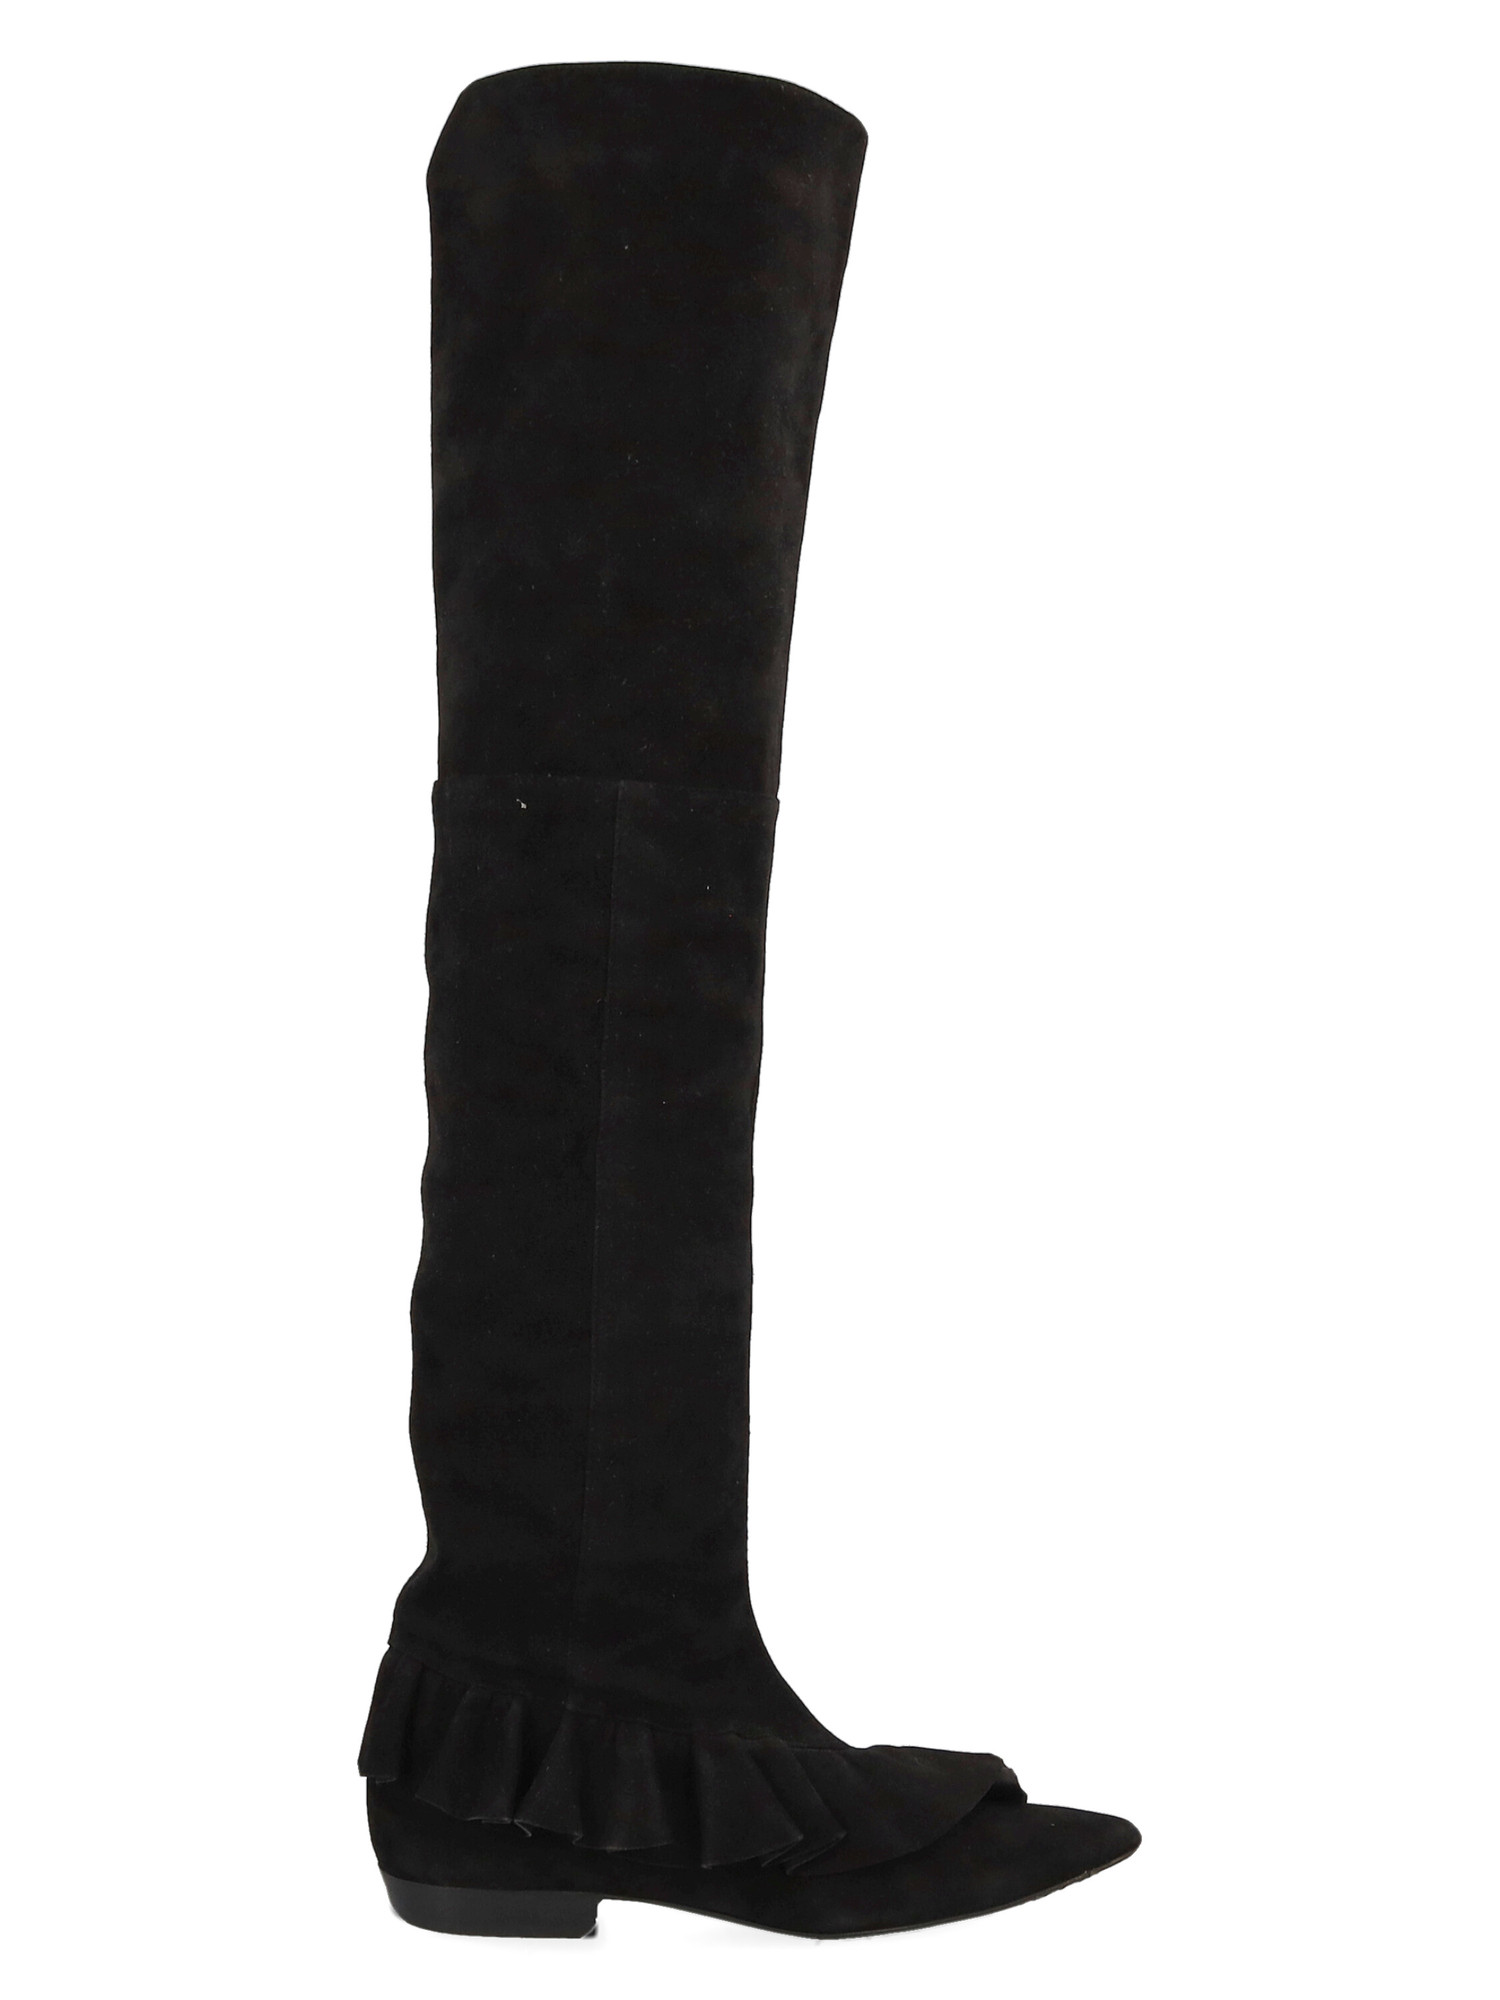 Pre-owned Jw Anderson Women's Boots - J.w. Anderson - In Black Leather